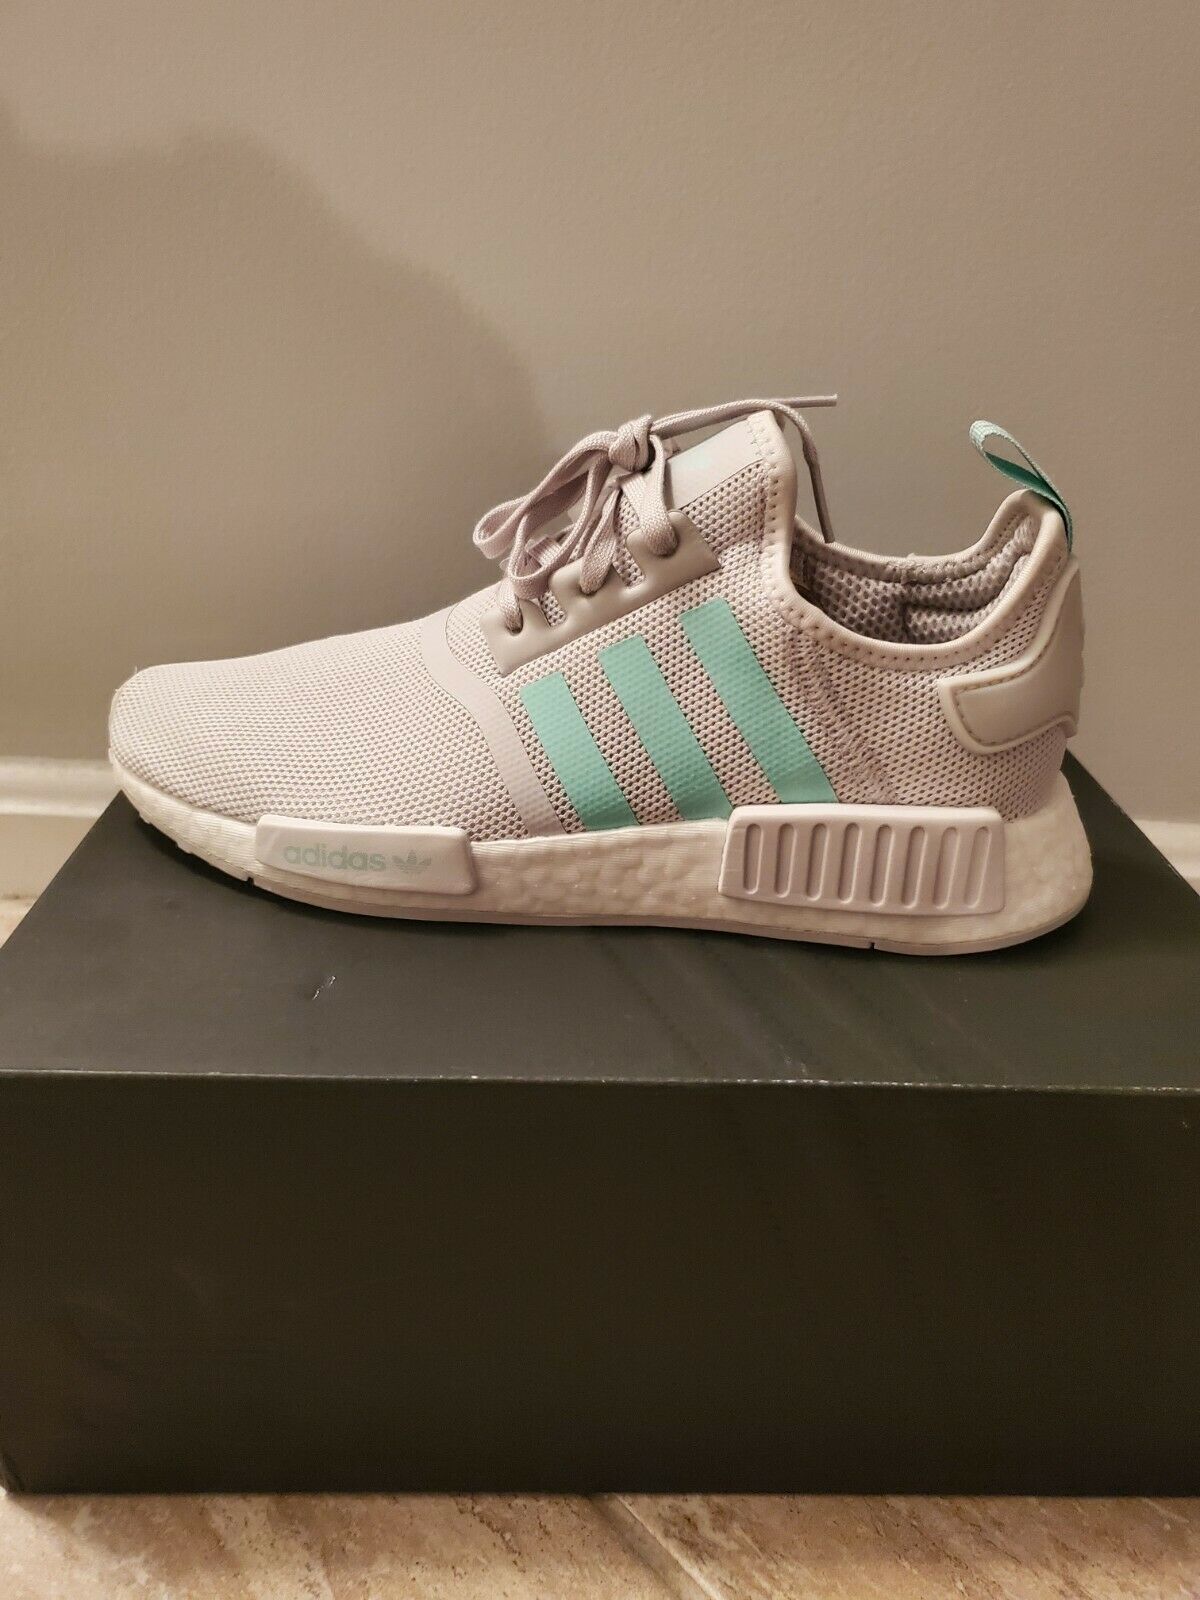 Women's Adidas Shoes - Size 6.5 - adidas NMD R1 Gray/Mint Green